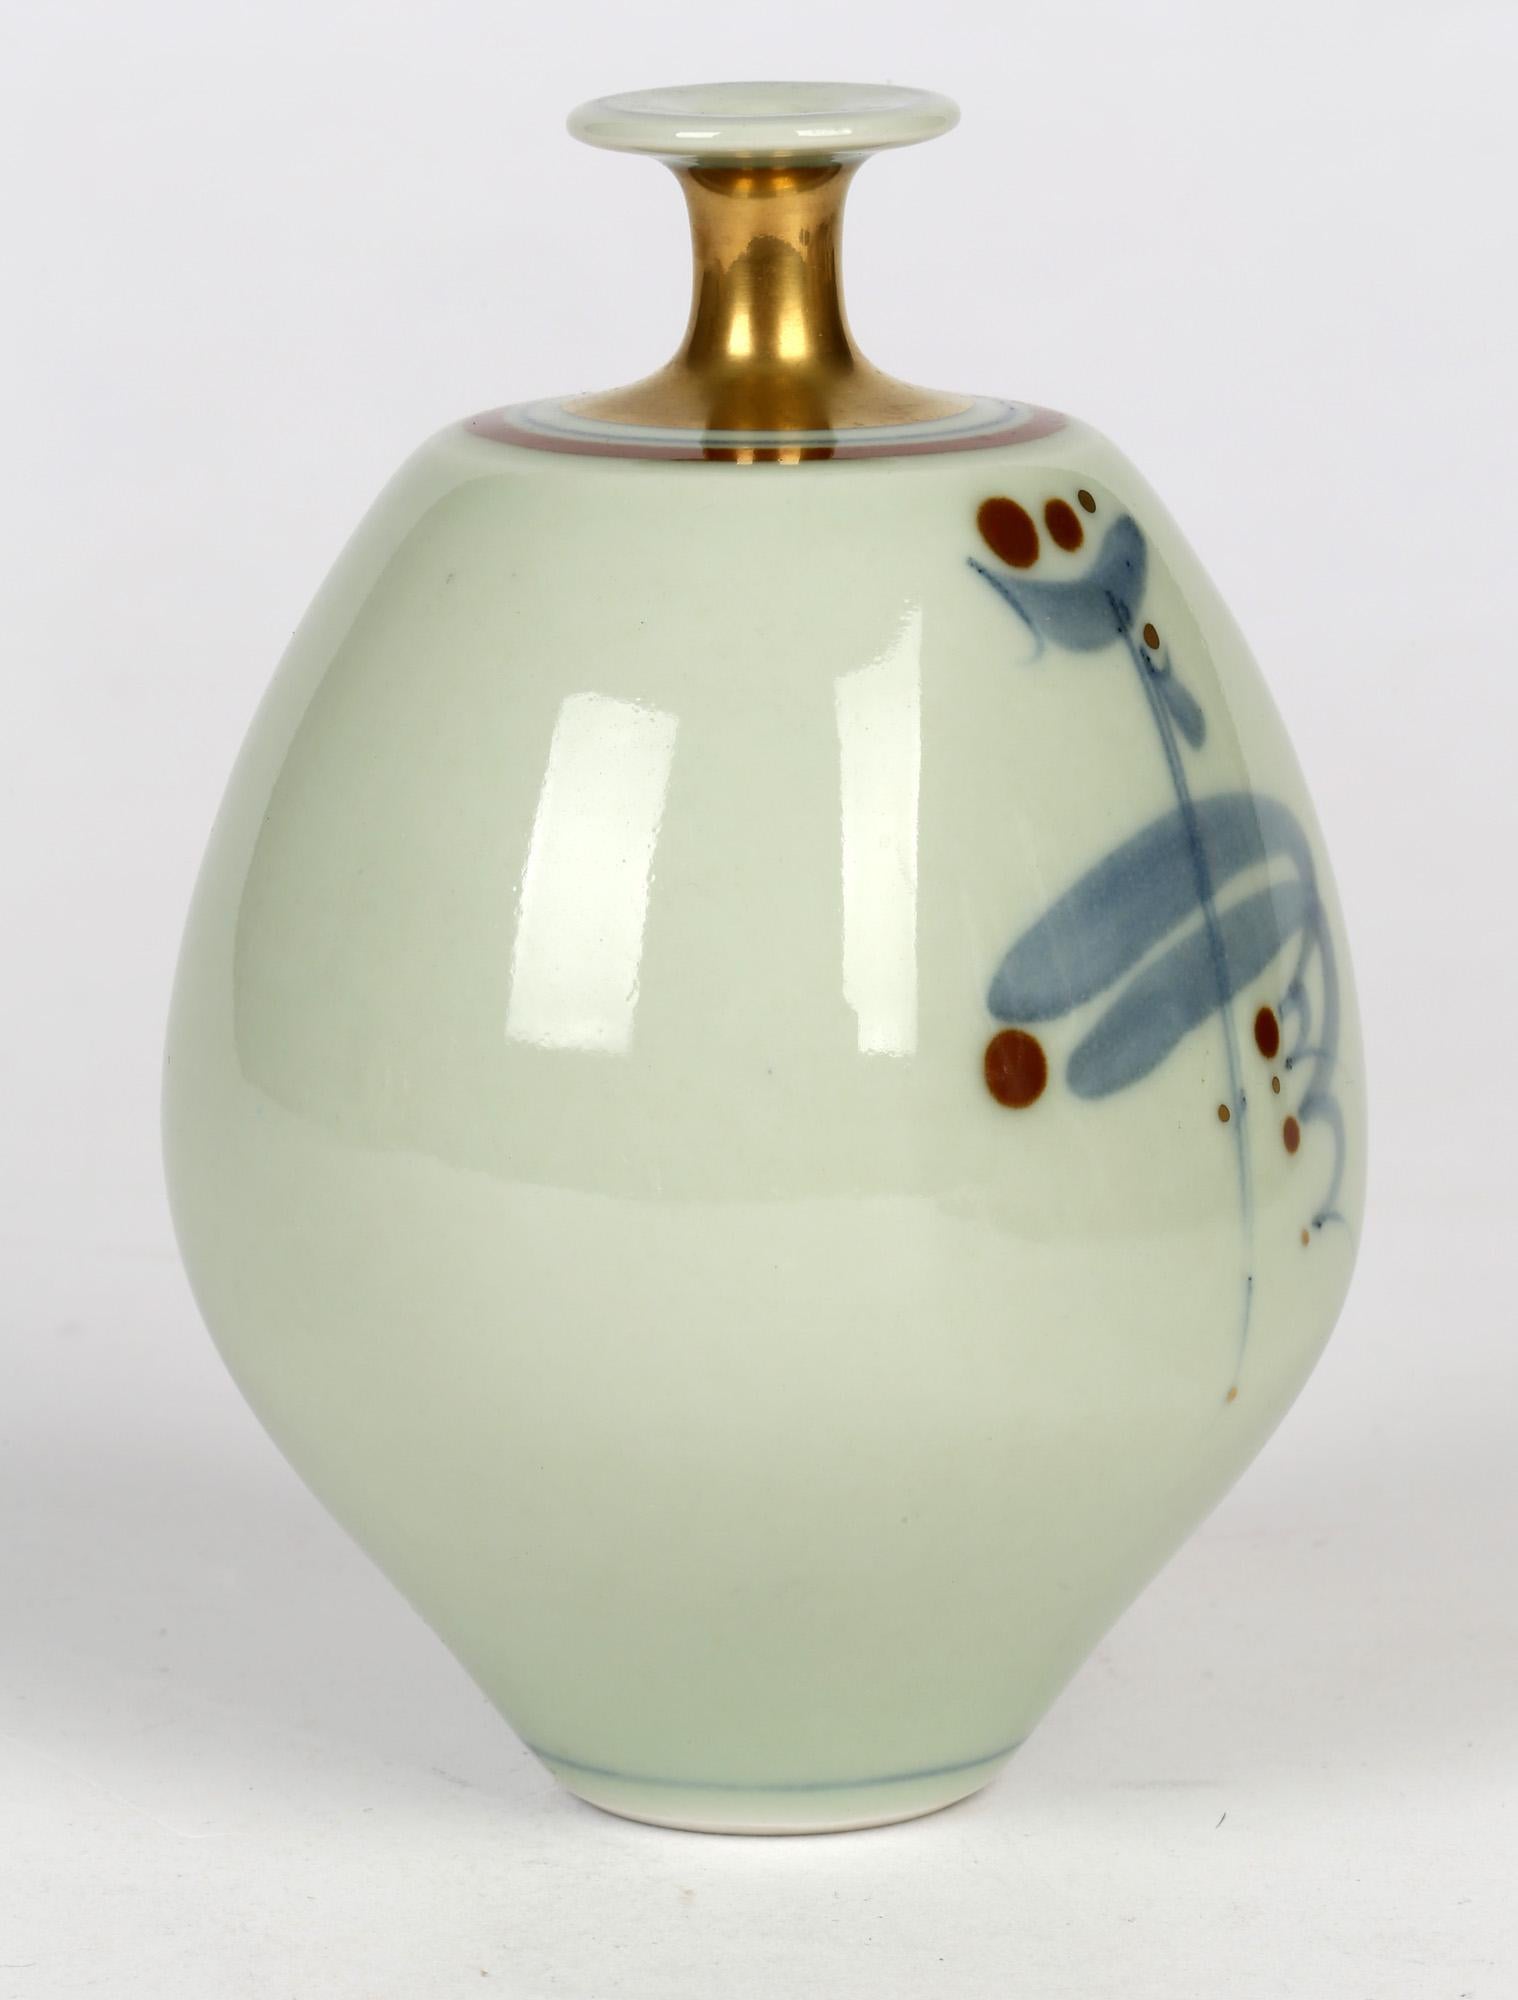 A good and finely made studio pottery porcelain bottle vase of slightly compressed form decorated with a stylized brush pattern on a cleladon glazed ground by Derek Clarkson (1928-2013) dating from 1999. The vase of rounded bulbous shape with